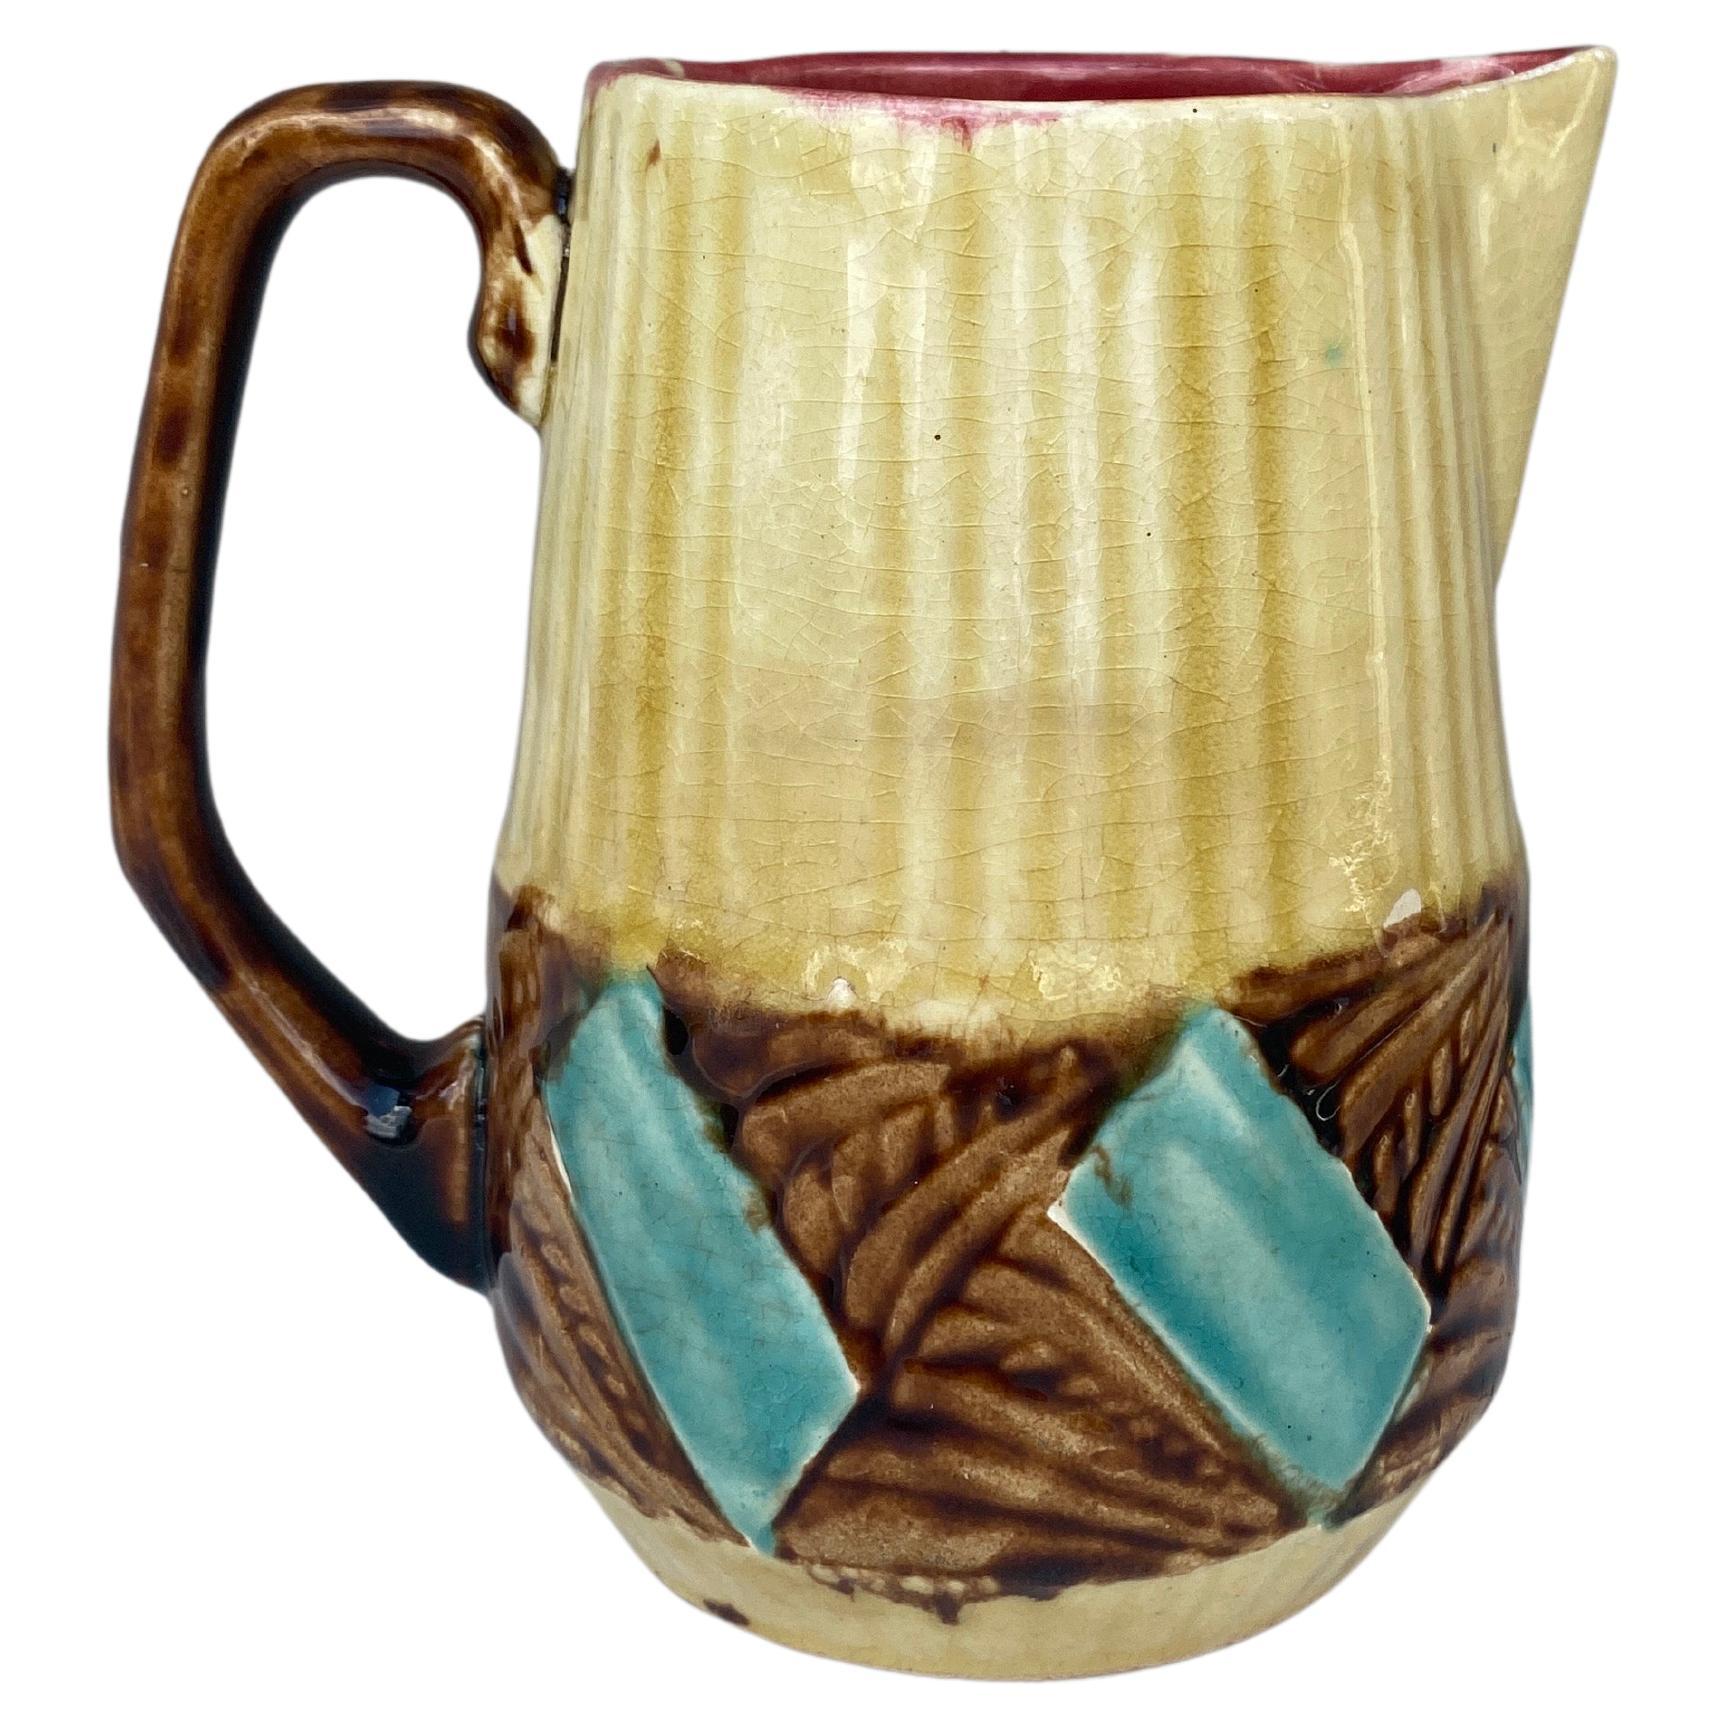 French Majolica pitcher signed Orchies, circa 1930.
Art deco period.